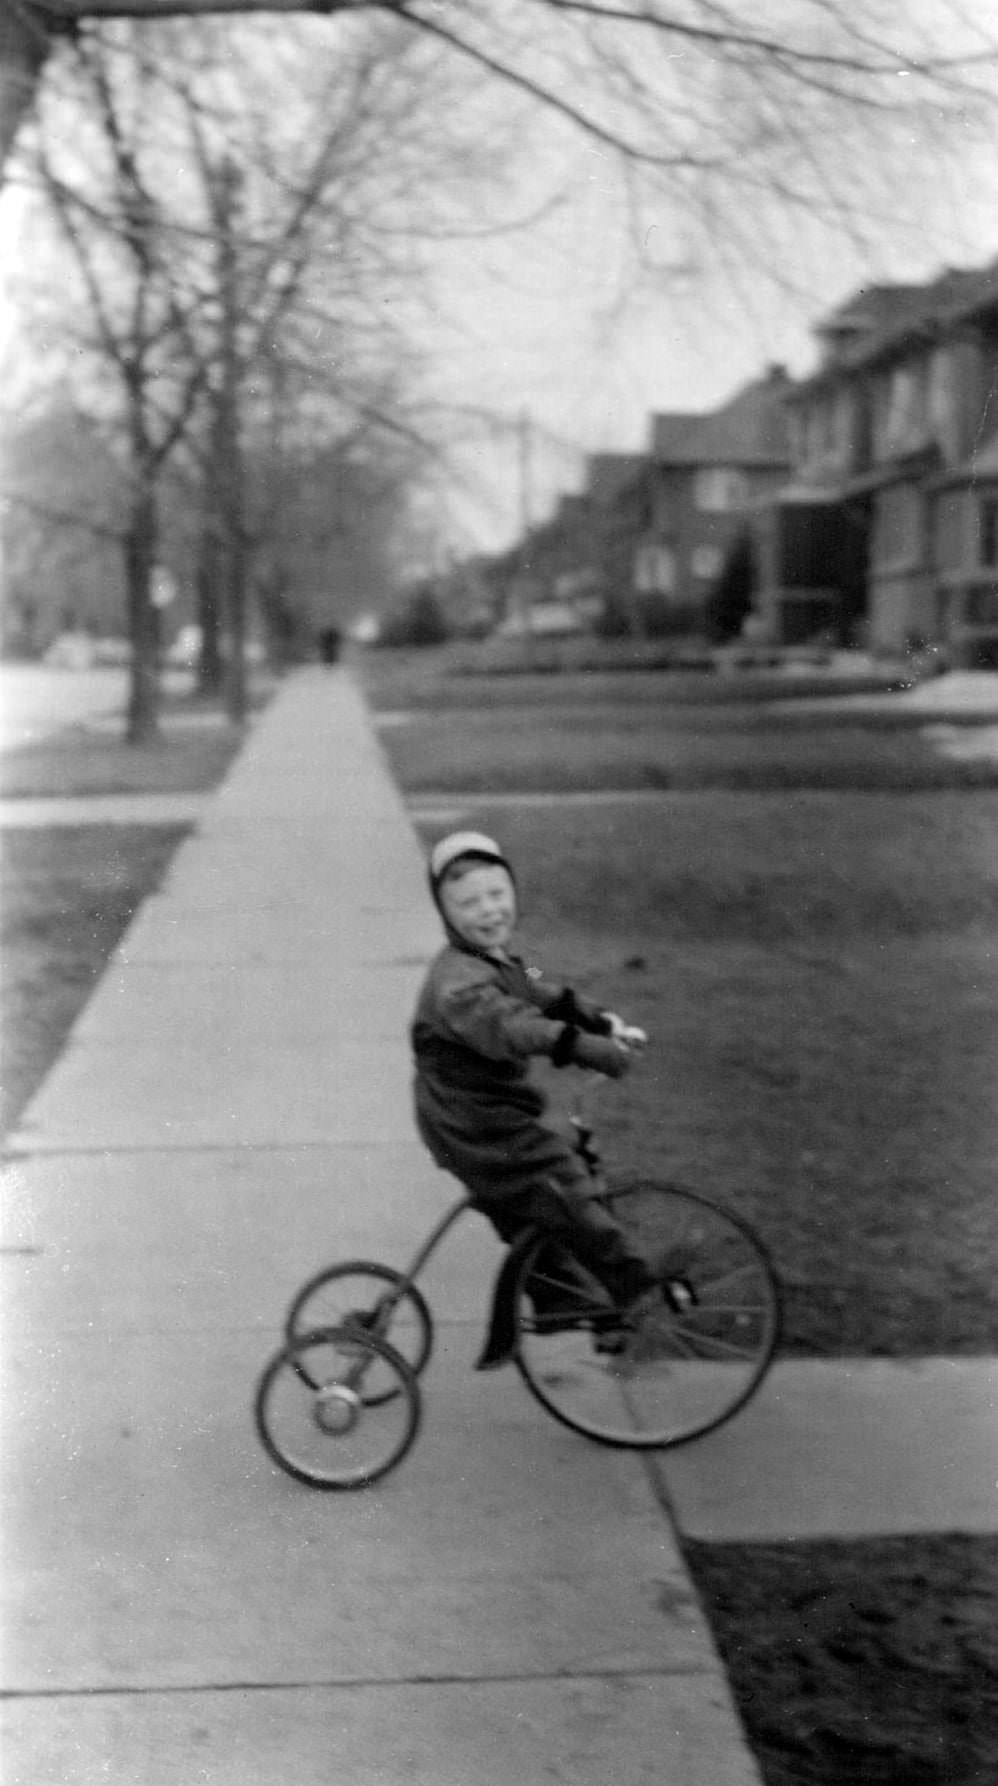 Riding my wheels on St. Clements Ave., 1950